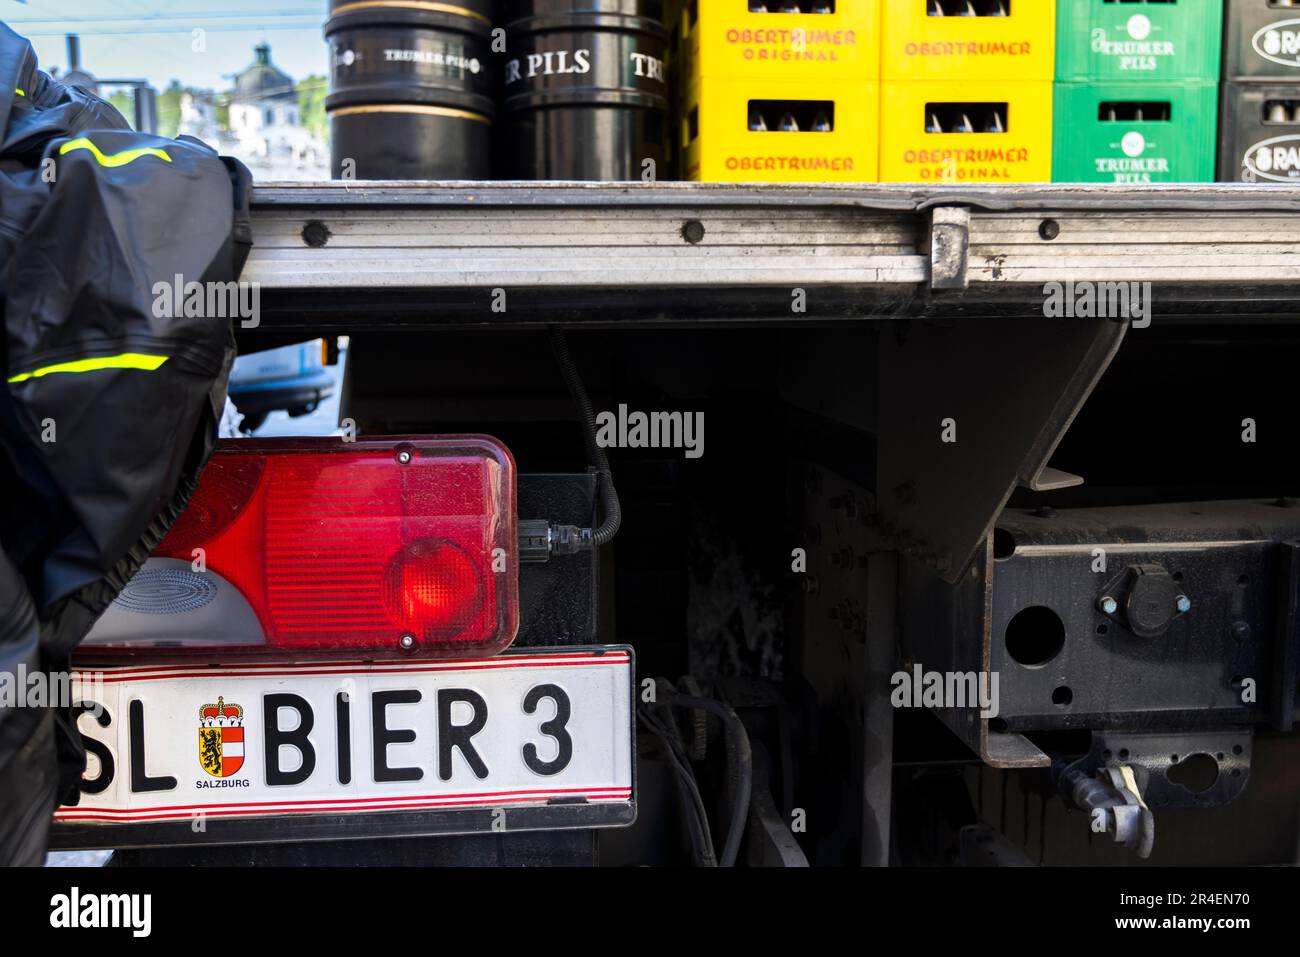 The vehicles that breweries use to deliver their goods have the word beer on their license plates in Salzburg, Austria Stock Photo